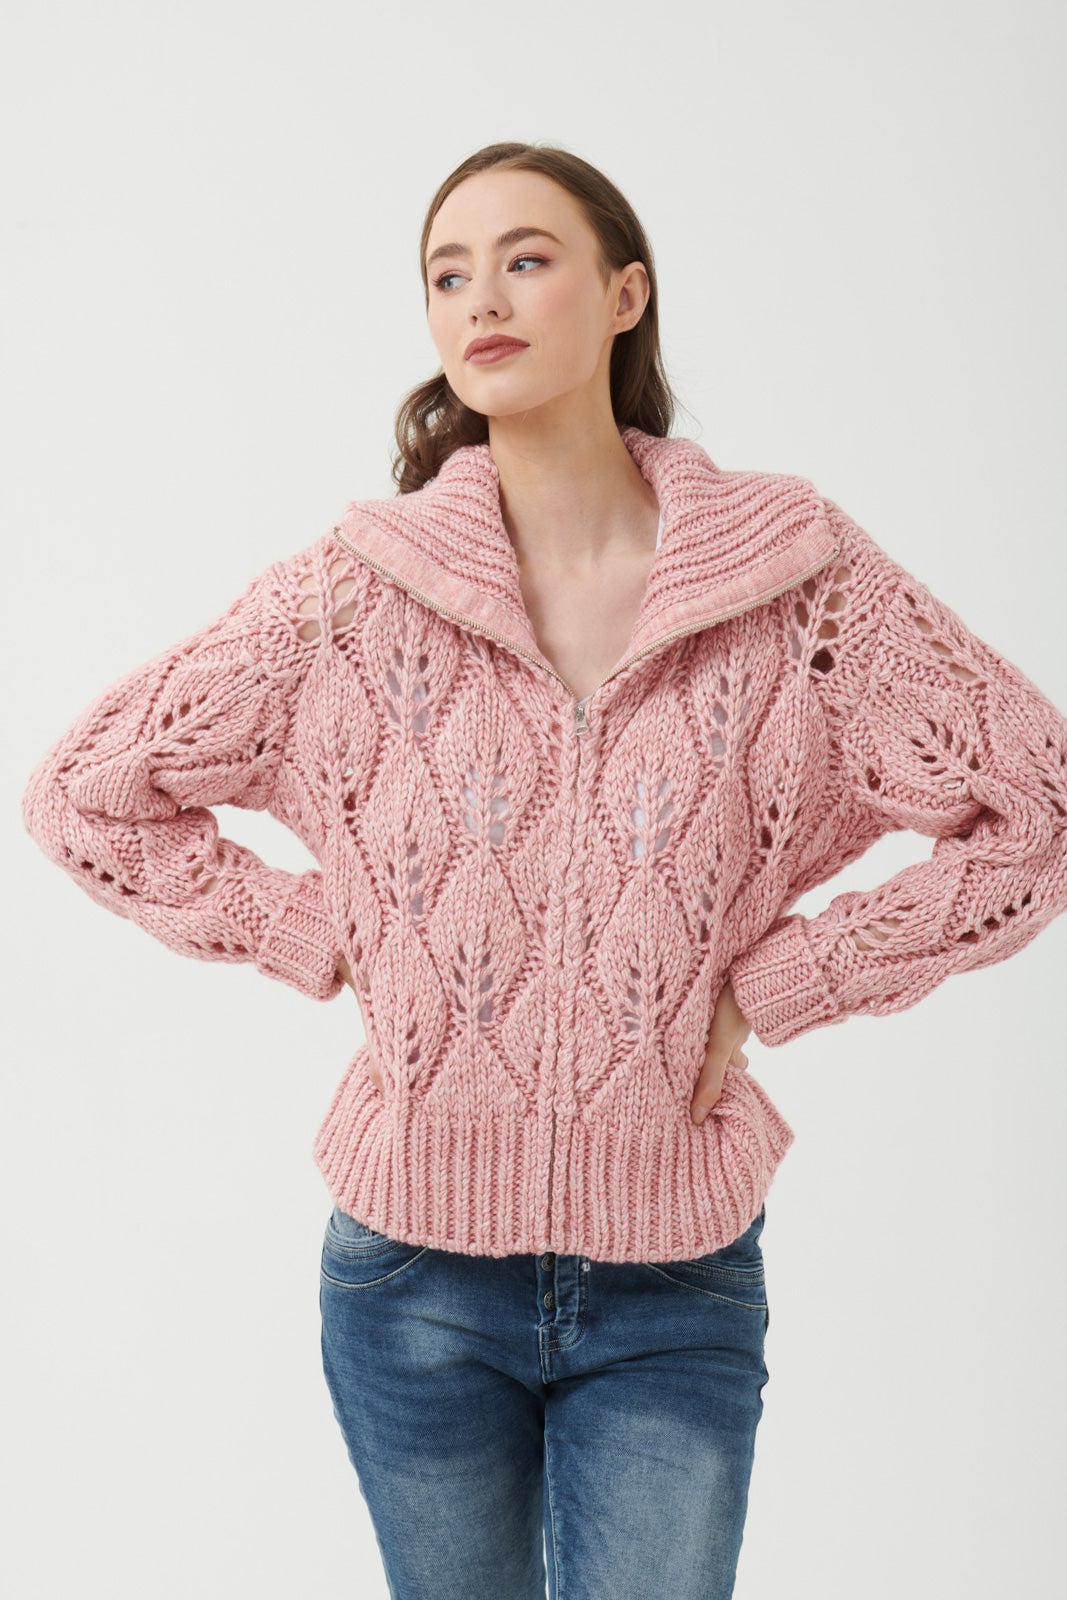 Ashton Knit Jacket - Musk-Knitwear & Jumpers-365 Days-The Bay Room